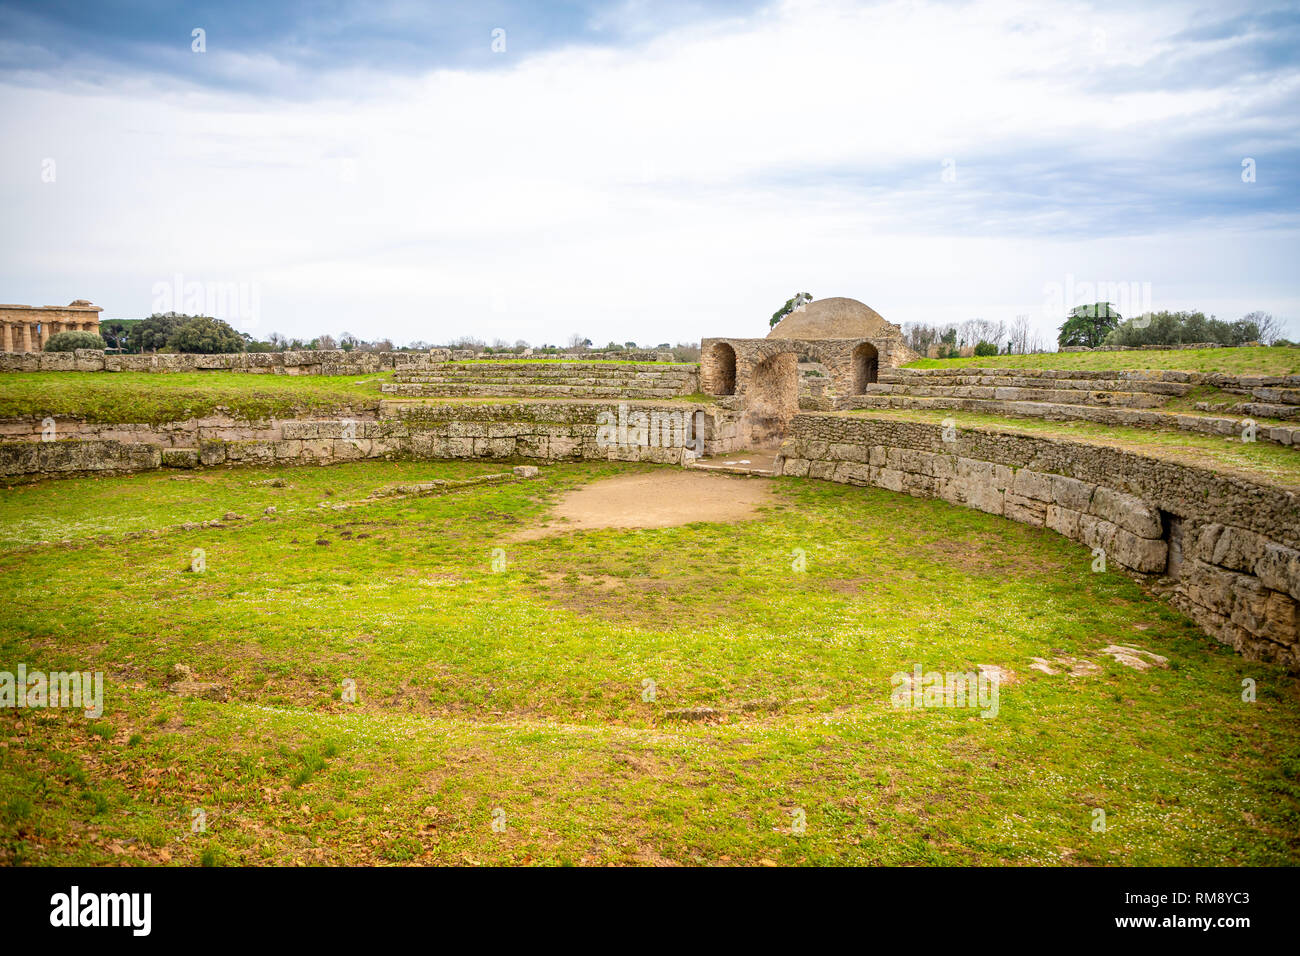 Old ruins of ancient Greek city in Paestum, Italy Stock Photo